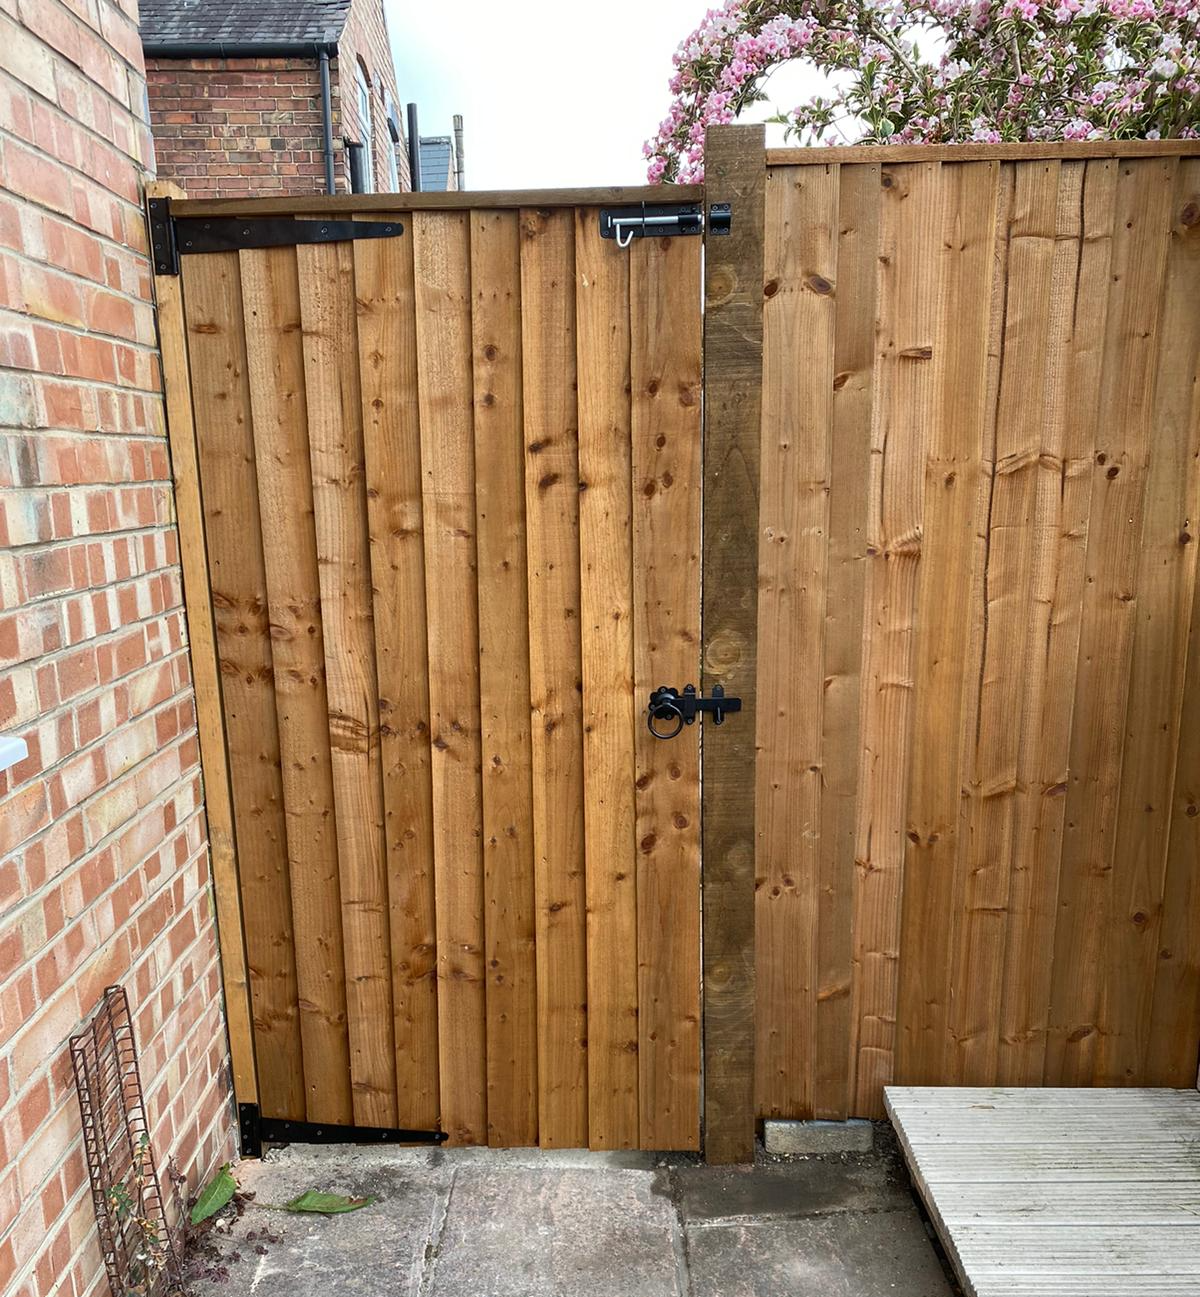 Fencing York wooden garden gate fitted in May 2021ide view